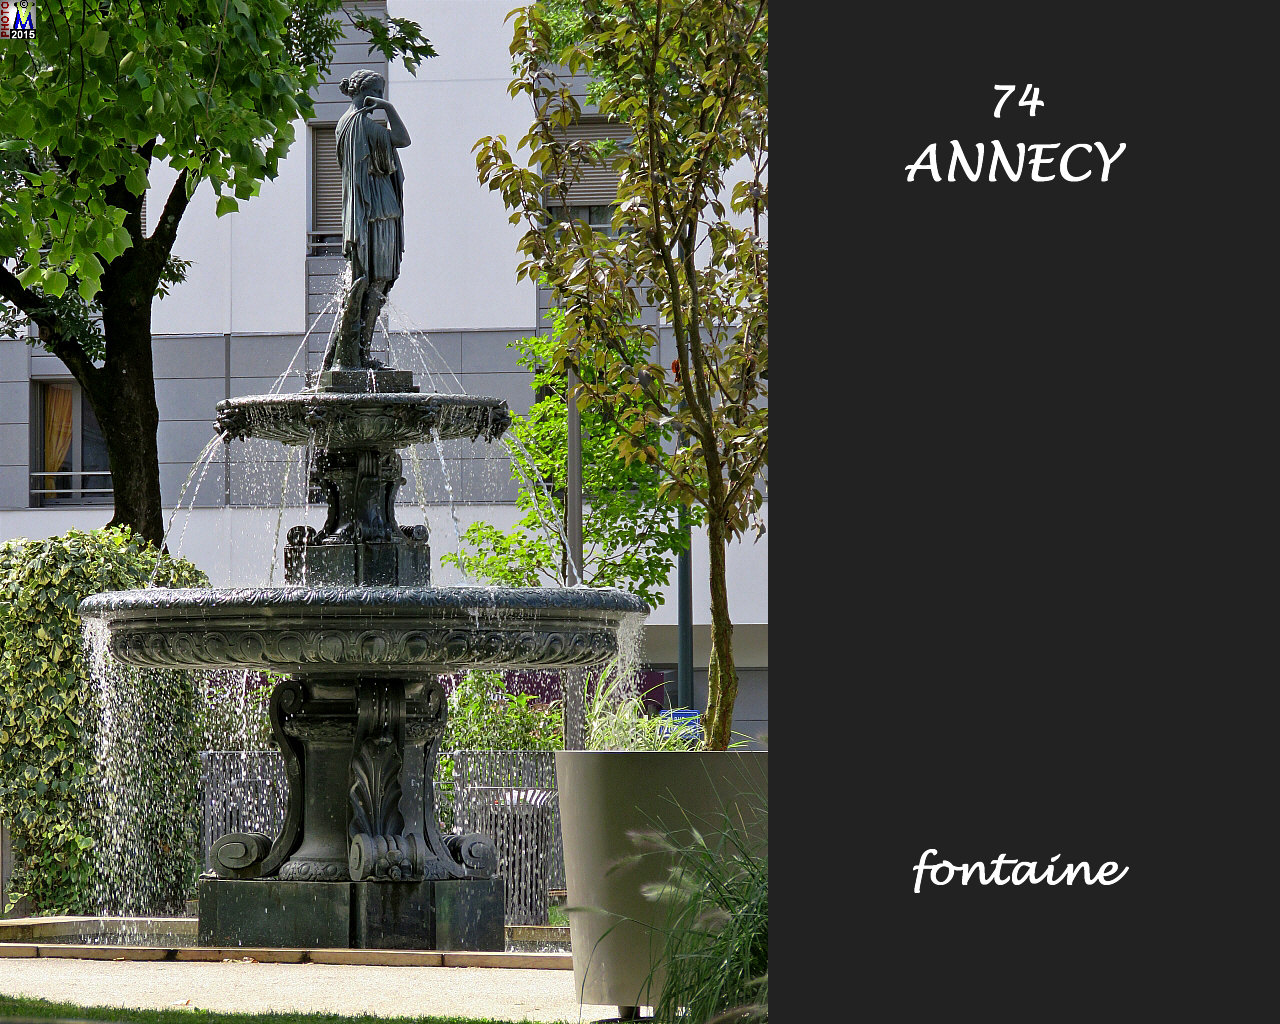 74ANNECY_fontaine_110.jpg